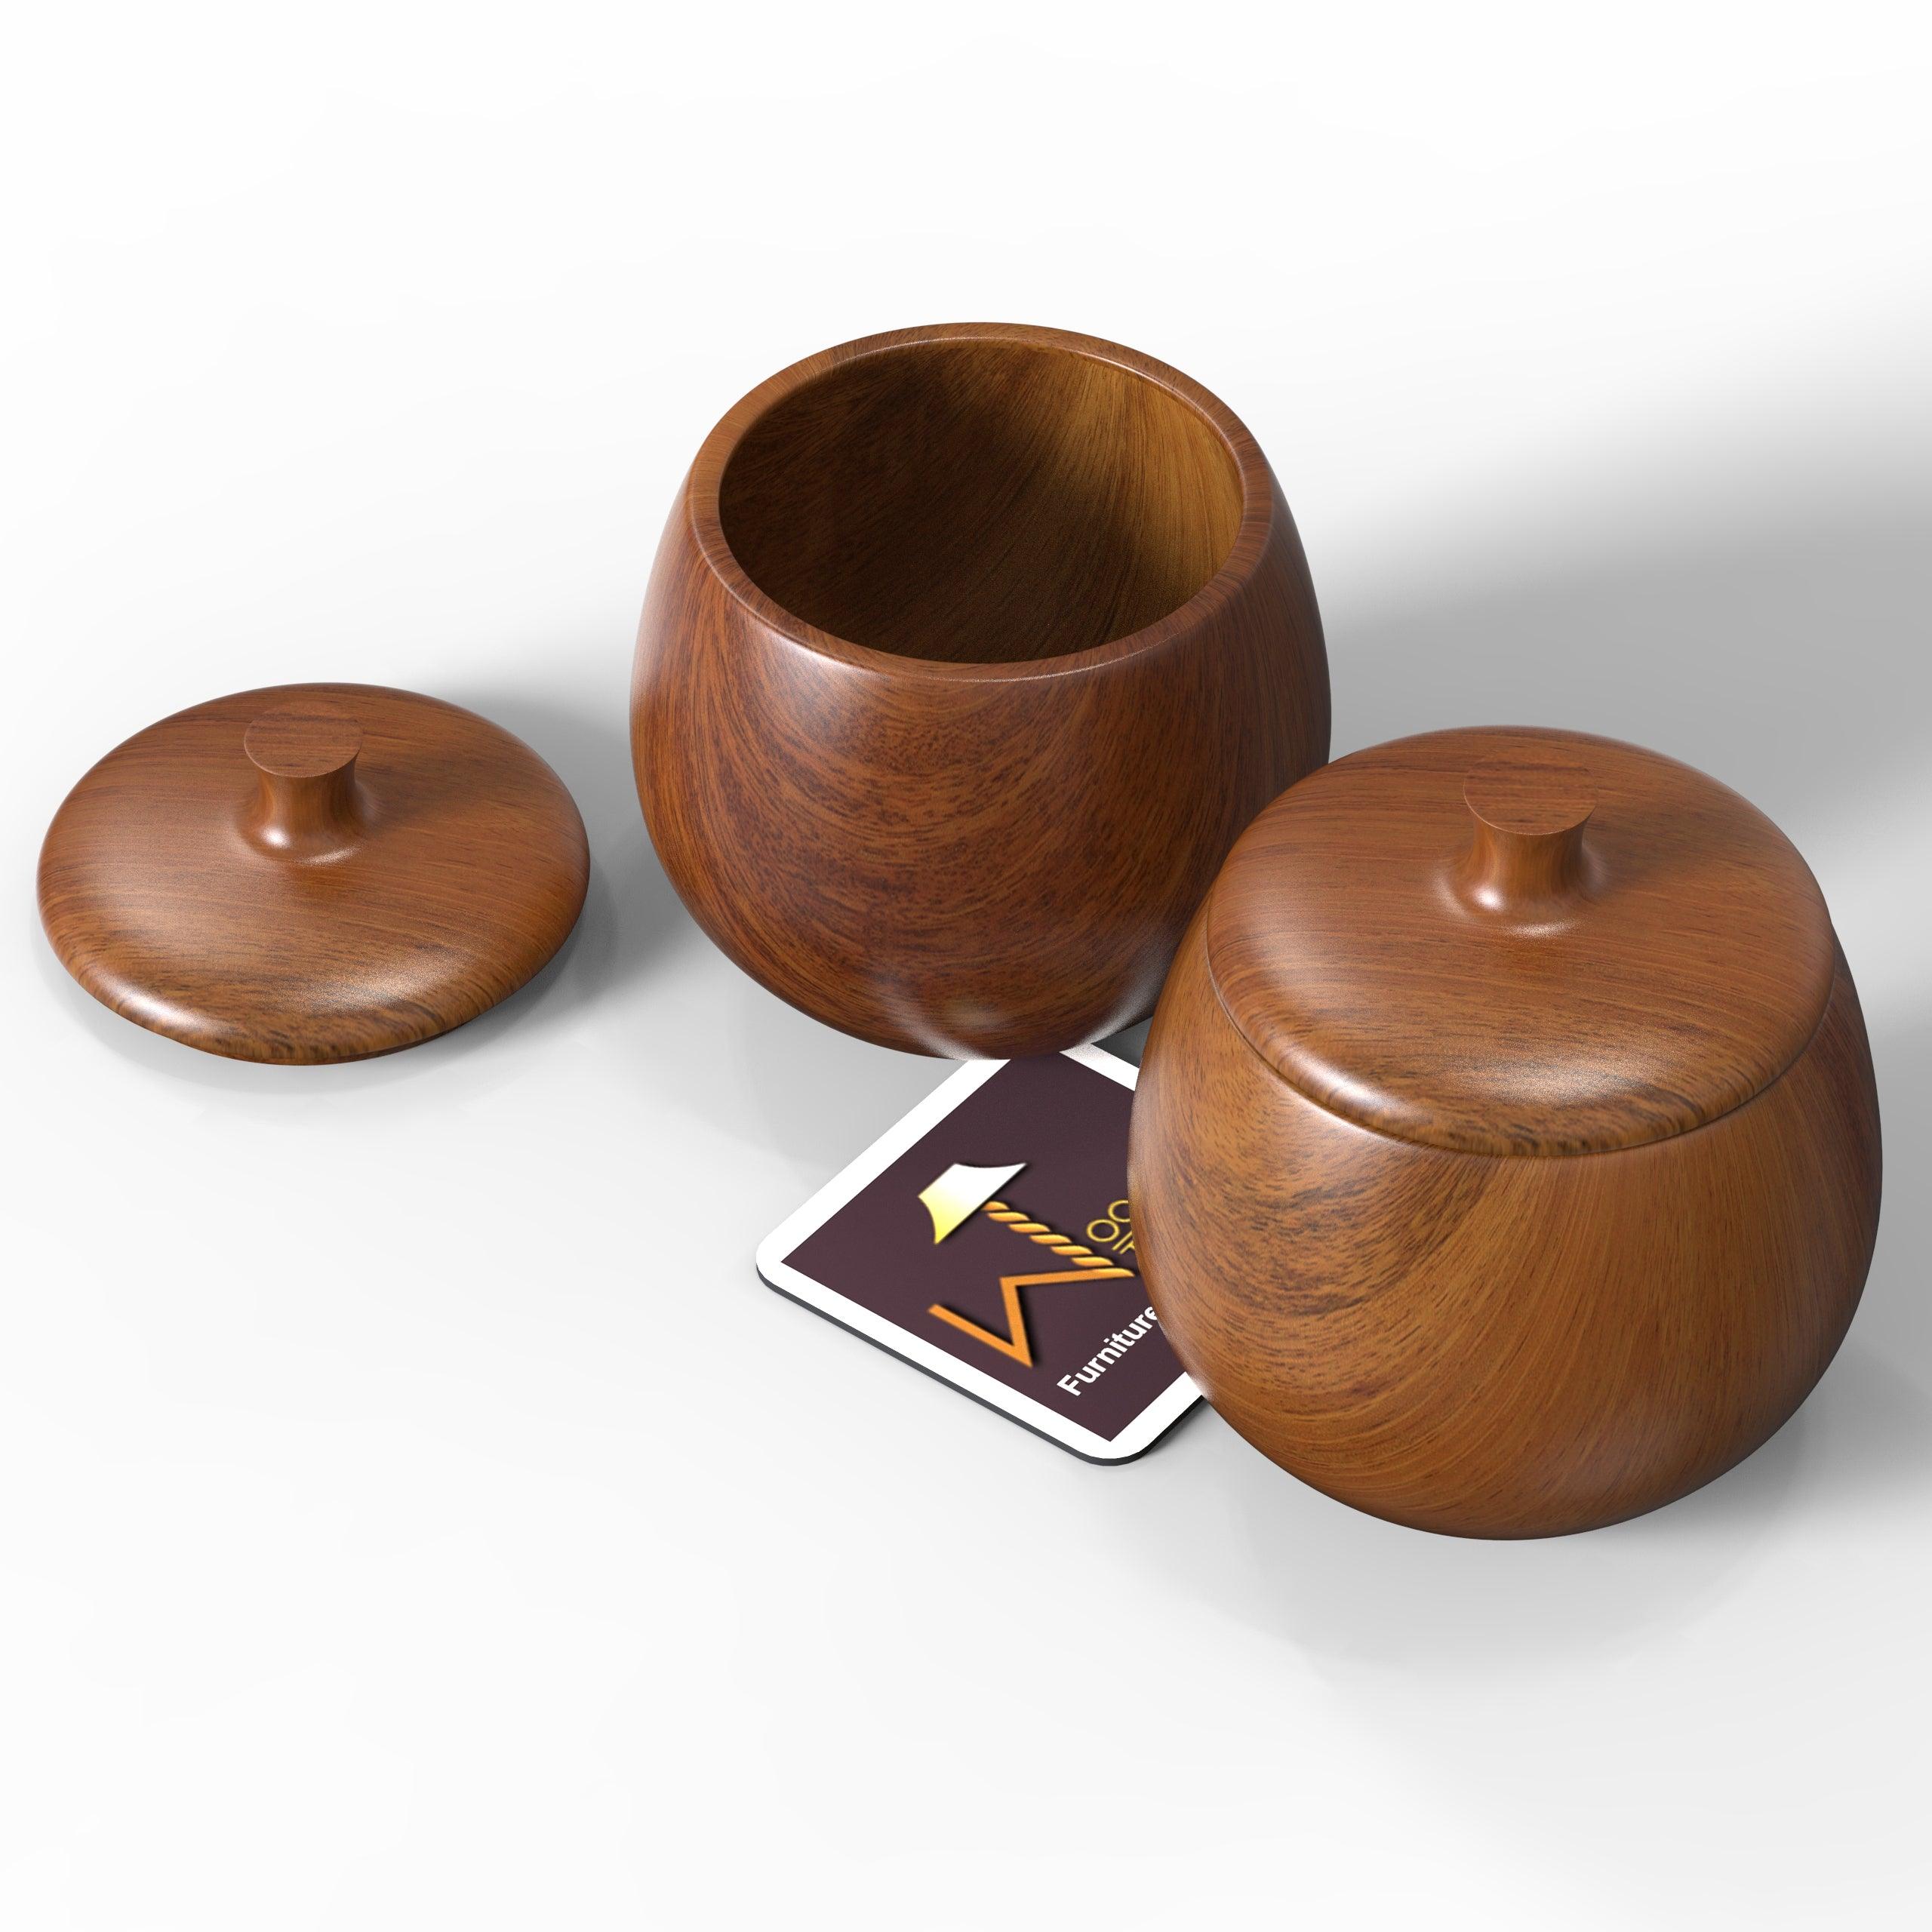 Buy Wooden Tea Coffee & Sugar Container Online at woodentwist